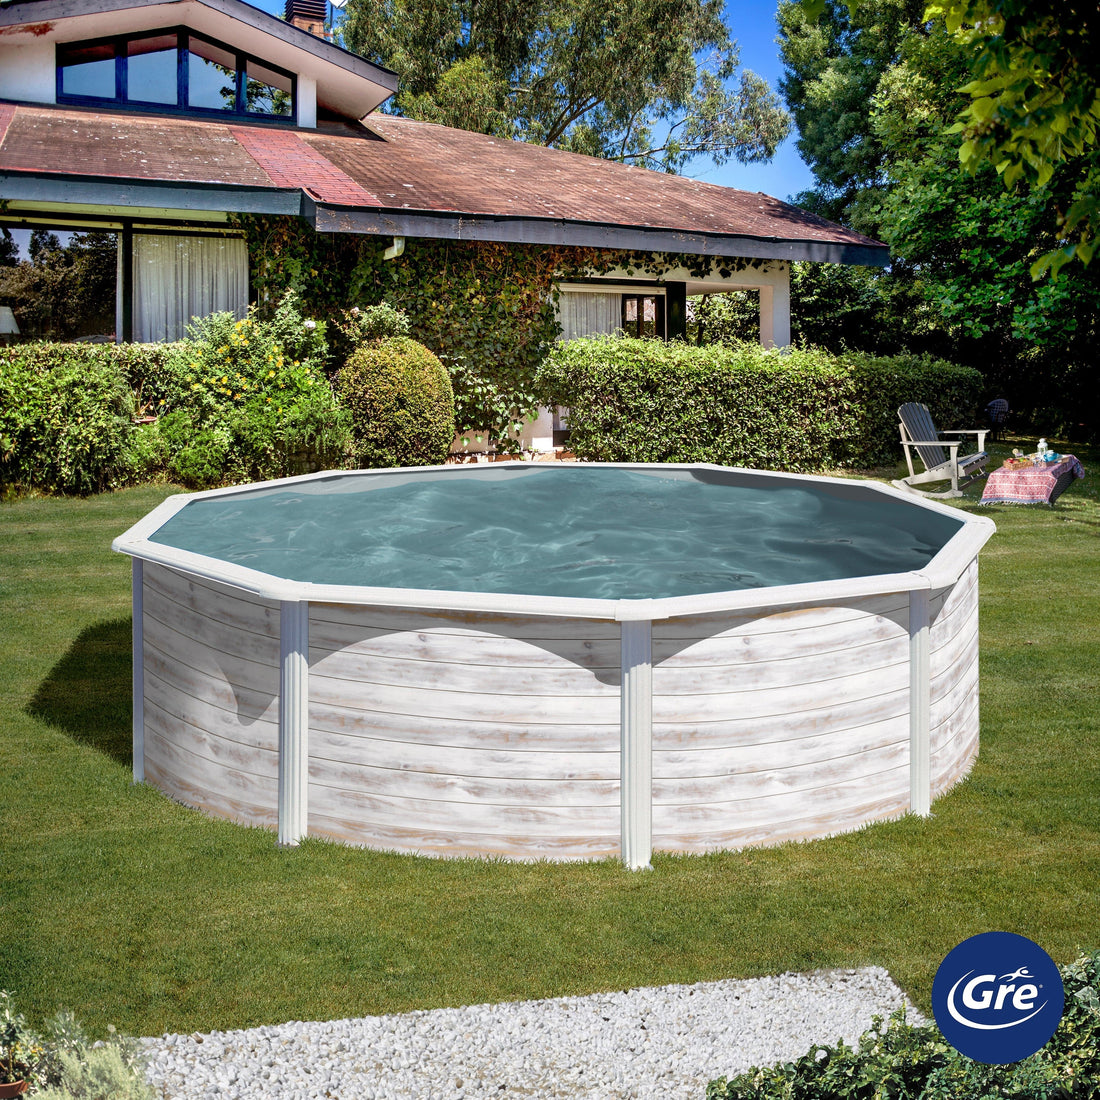 ROUND STEEL SWIMMING POOL NORDIC DECORATION DIAM. 300 X 120H WITH SAND FILTER